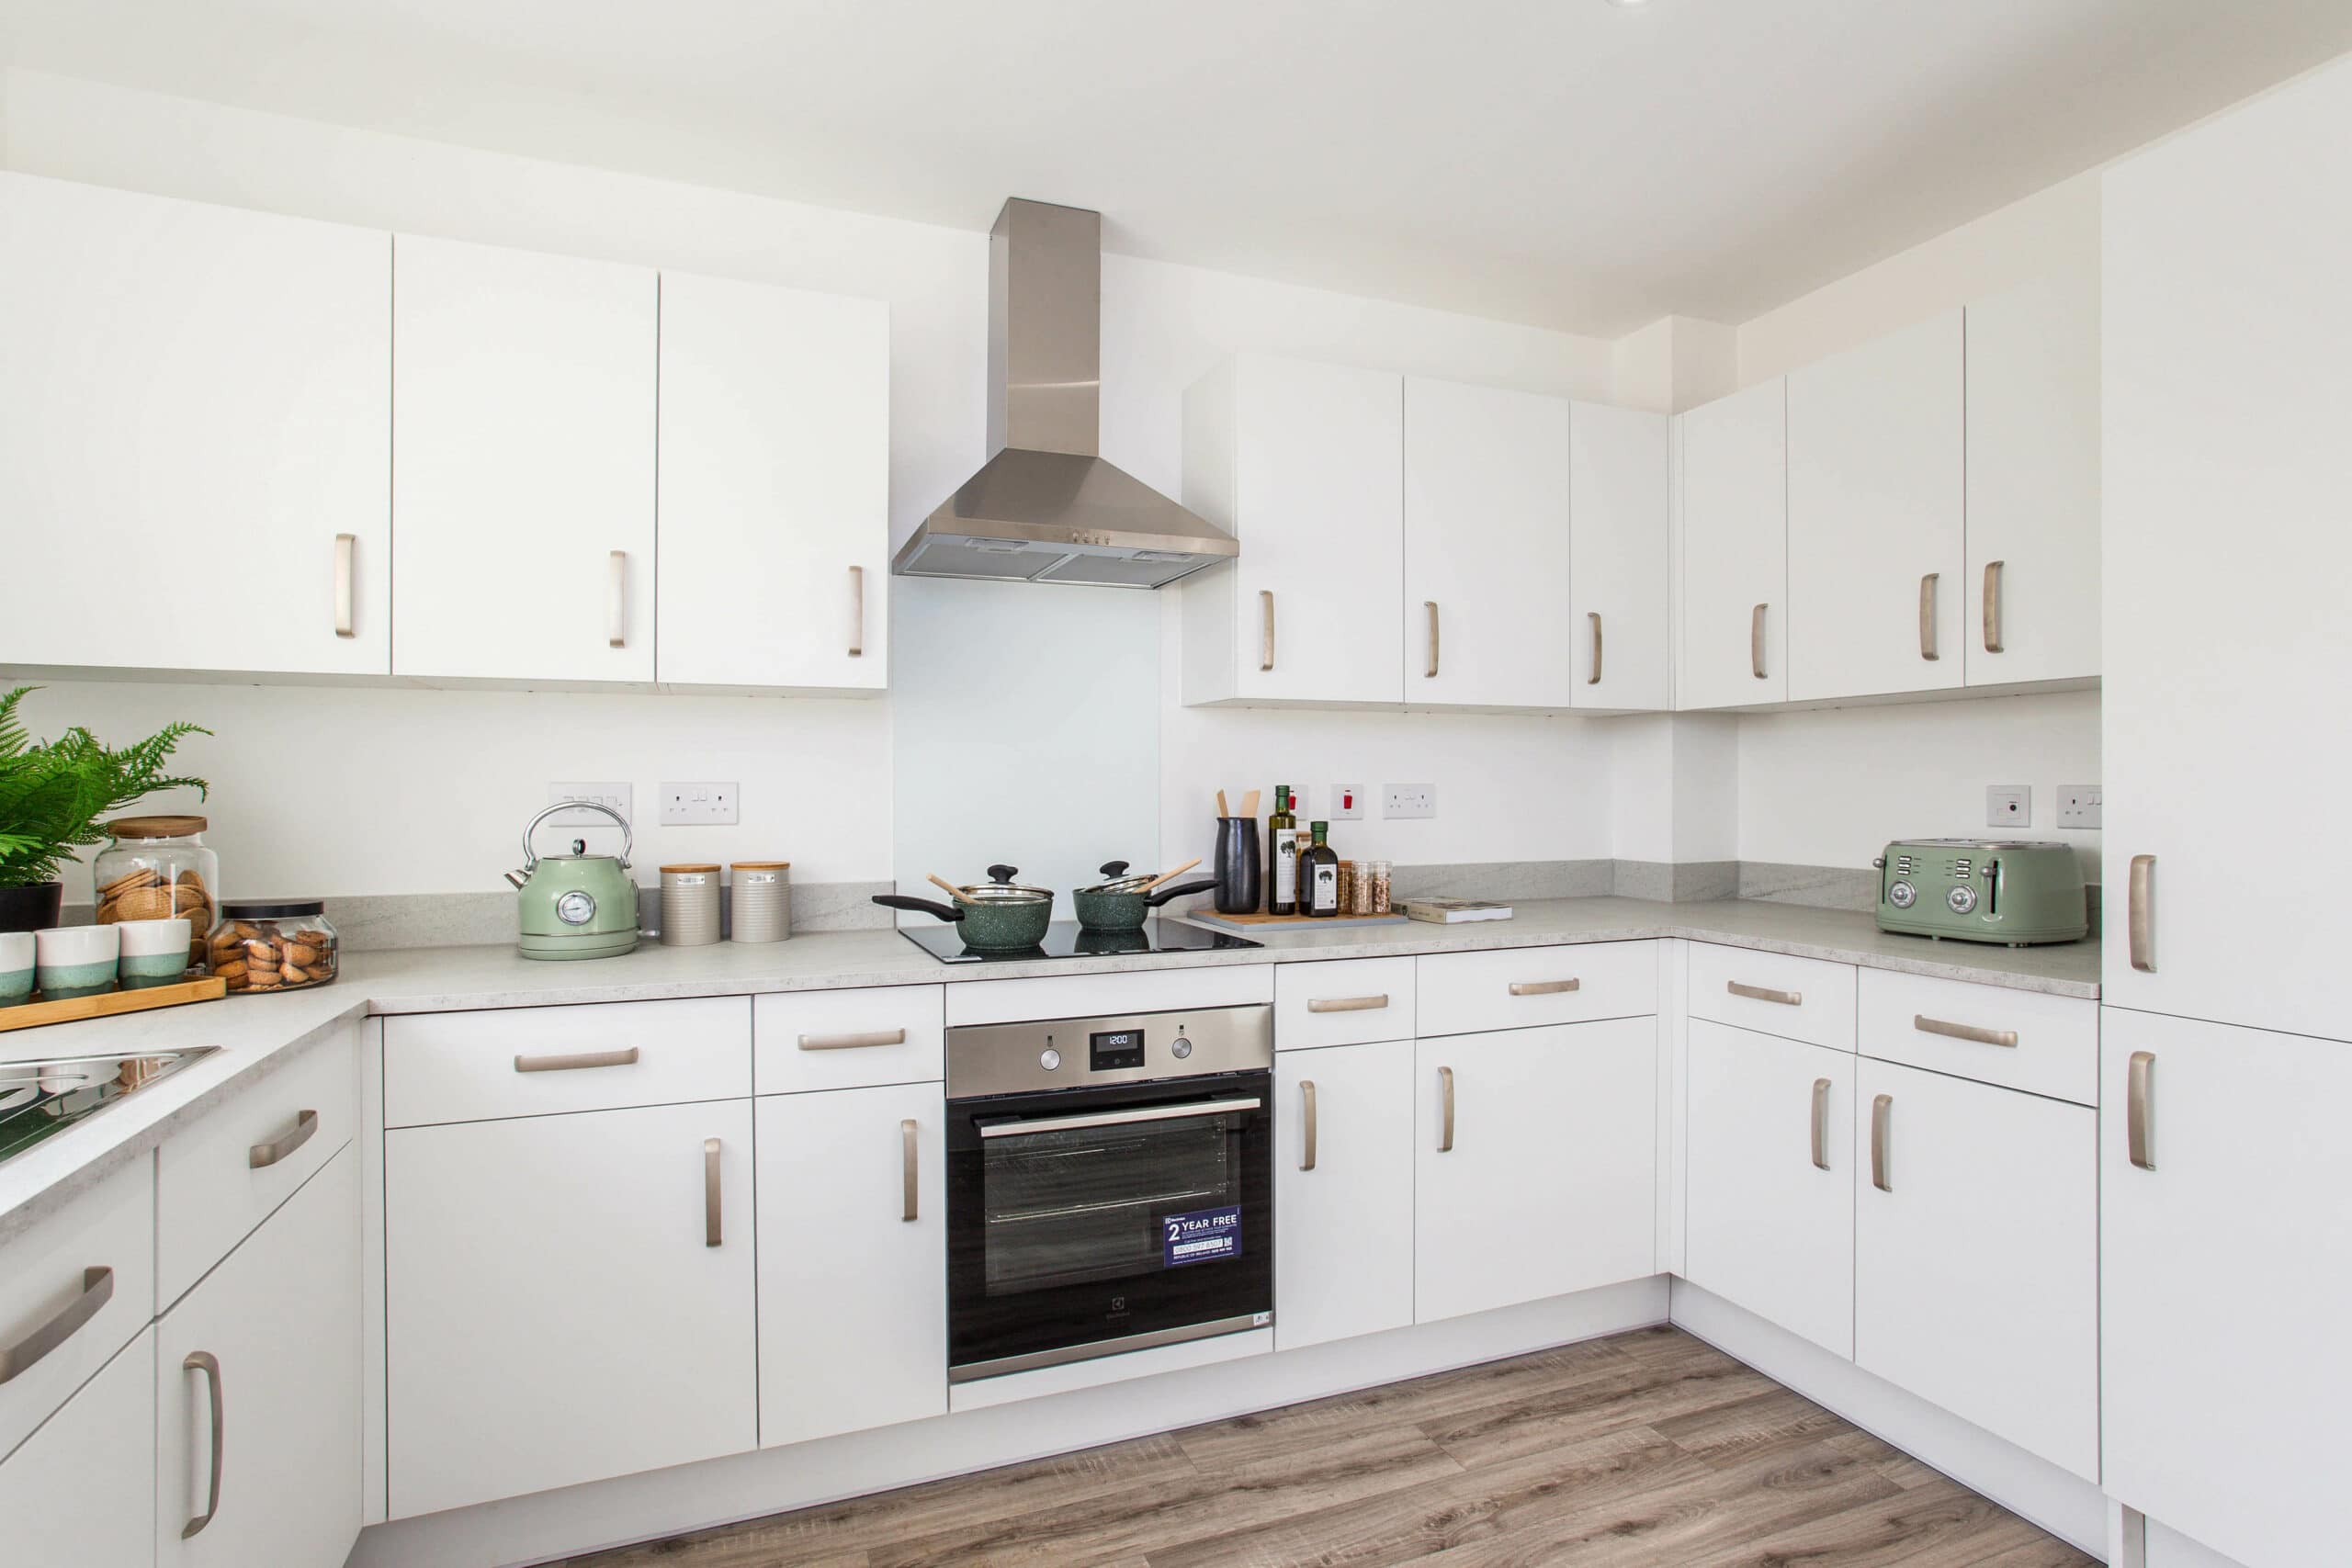 An image of a kitchen at Violet Cross by Abri Homes - available to purchase through Shared Ownership on Share to Buy!